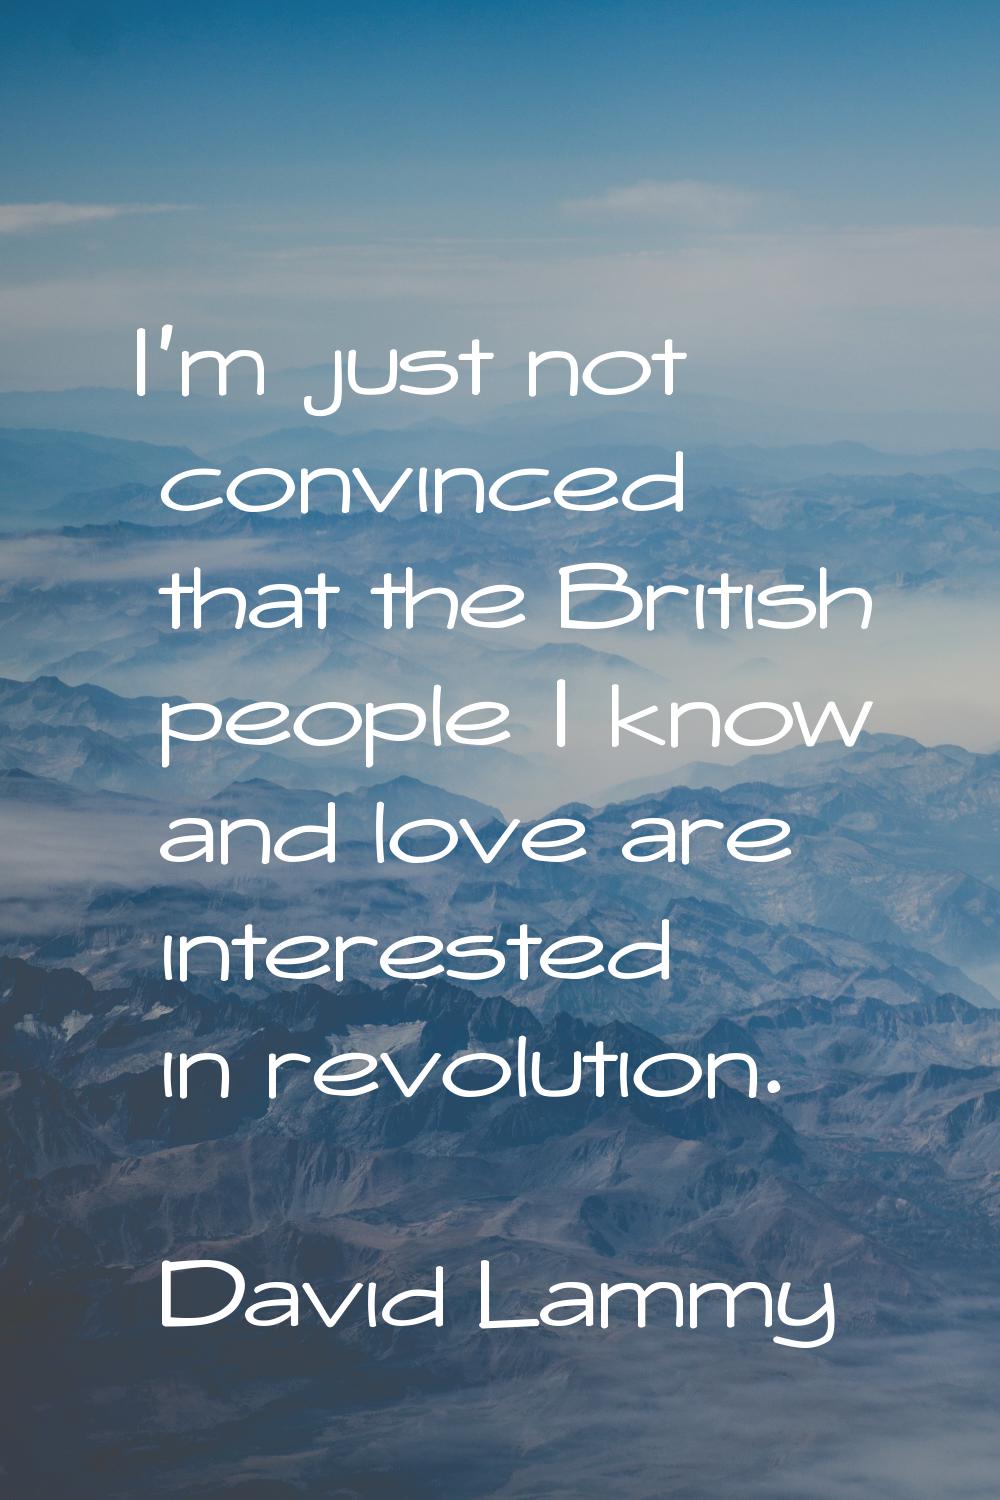 I'm just not convinced that the British people I know and love are interested in revolution.